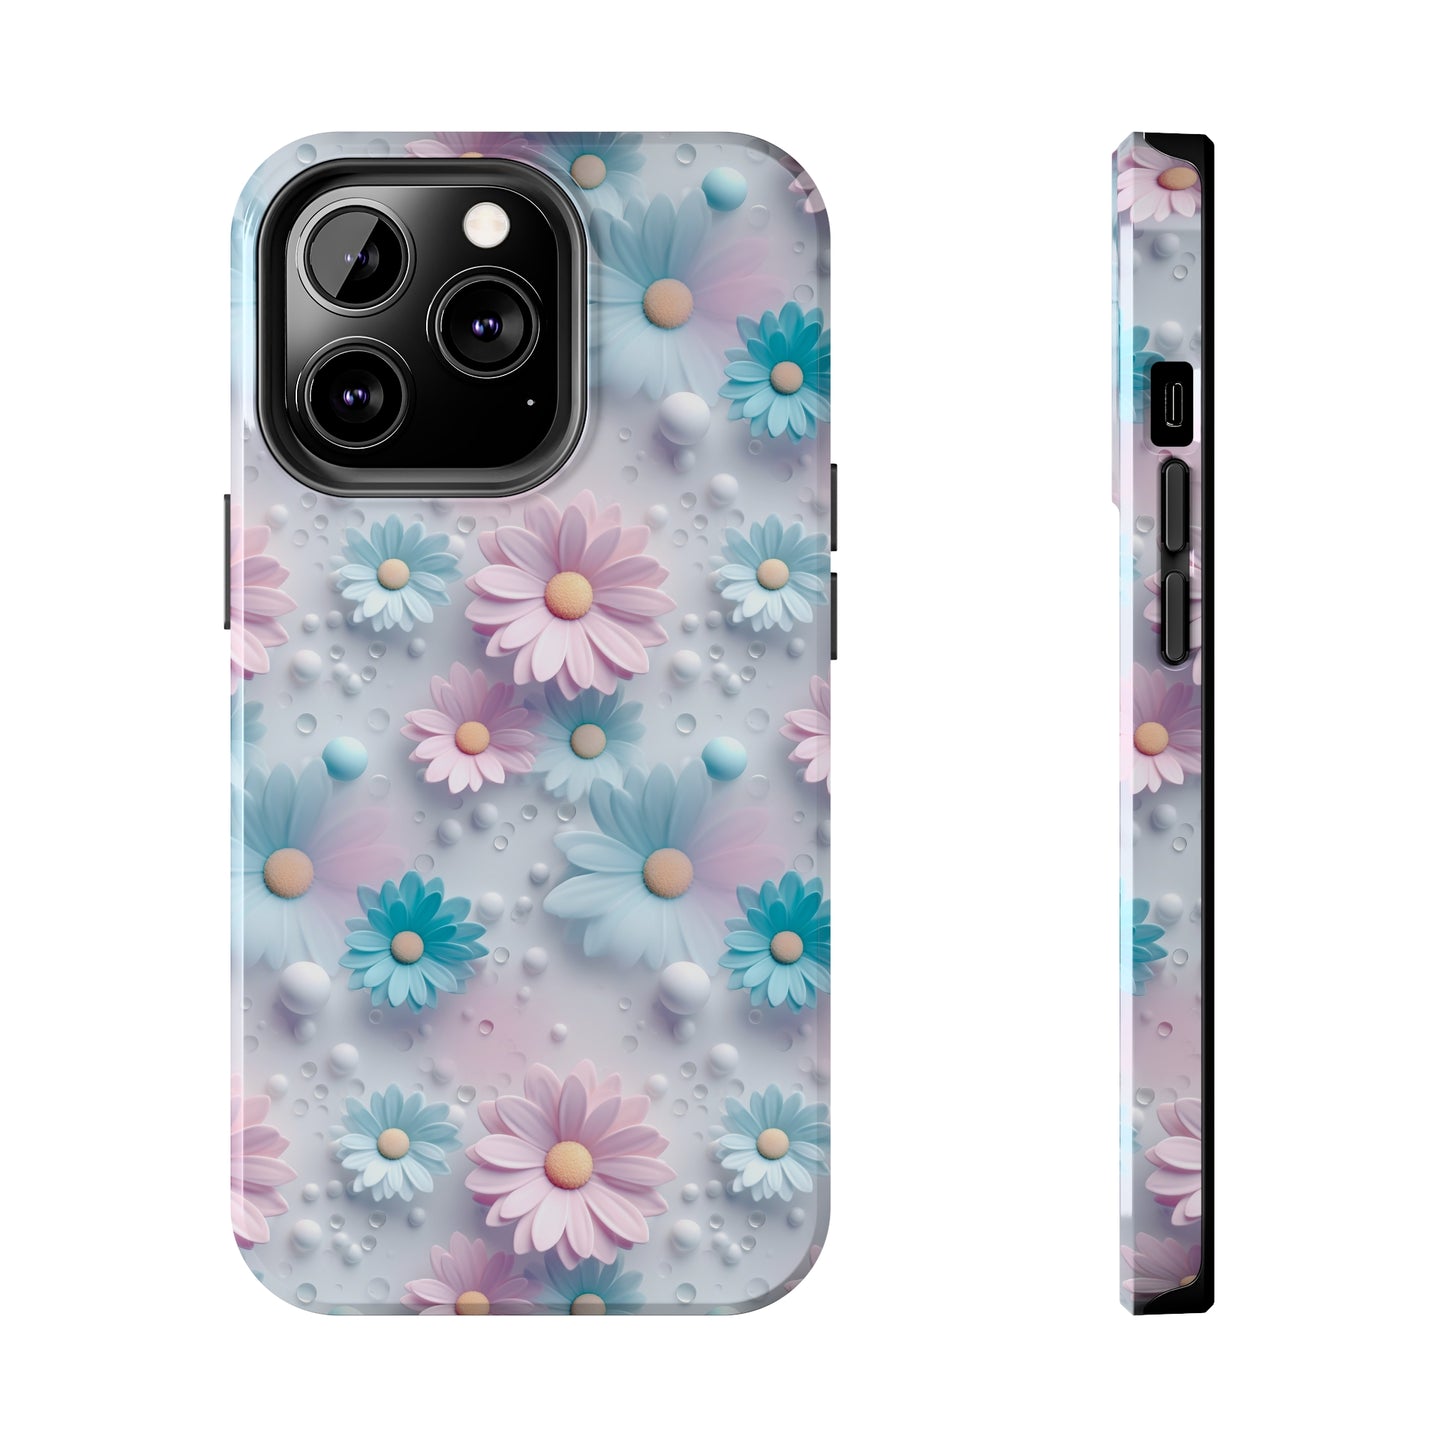 Dreamy Pastel Daisies Digital print Design Tough Phone Case compatible with a large variety of iPhone models, Gift, Phone Case